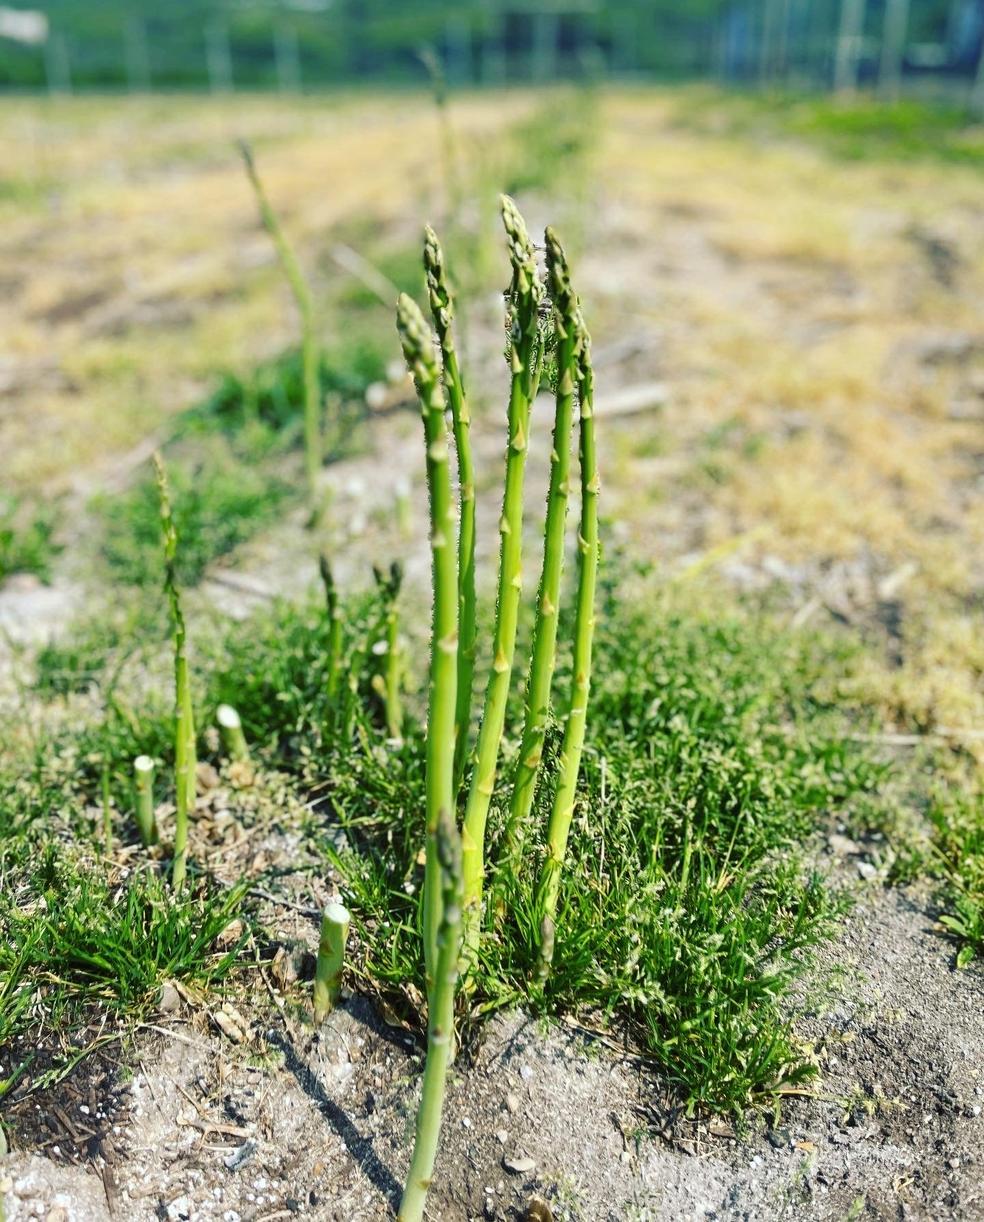 Now accepting applications for asparagus harvesting experience at Omagari Lakeside Park!